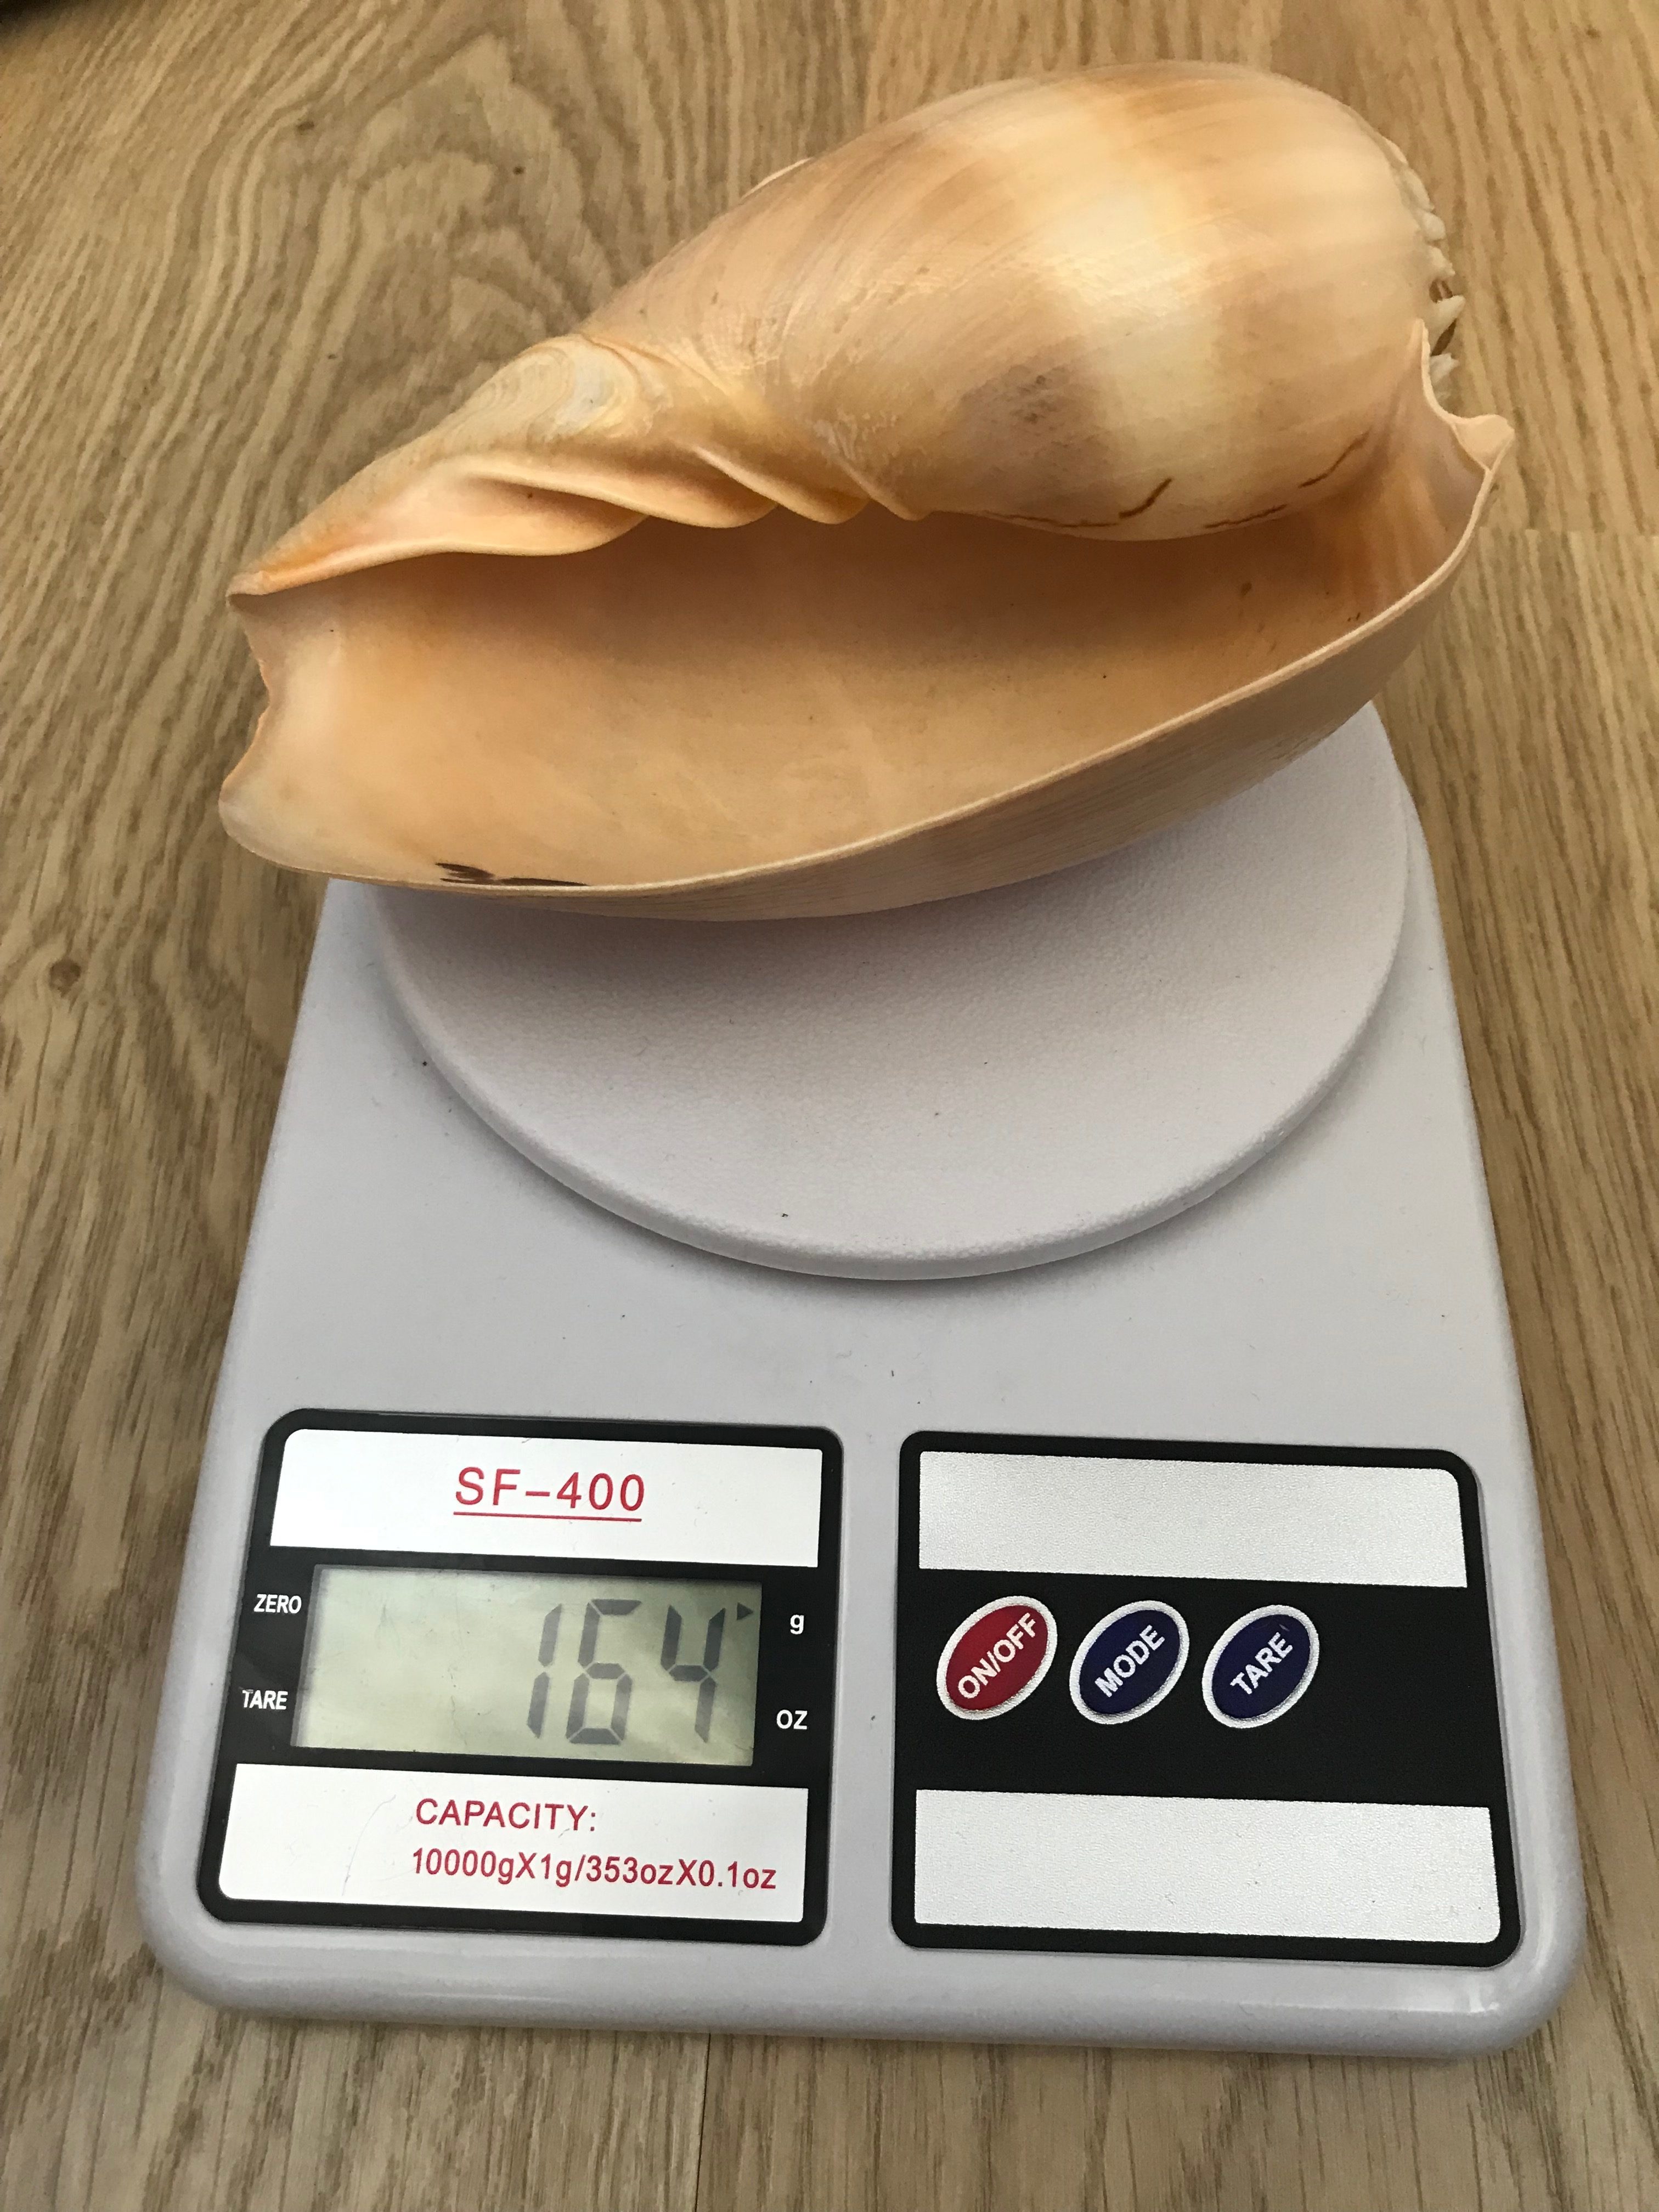 the weight of the shell is large